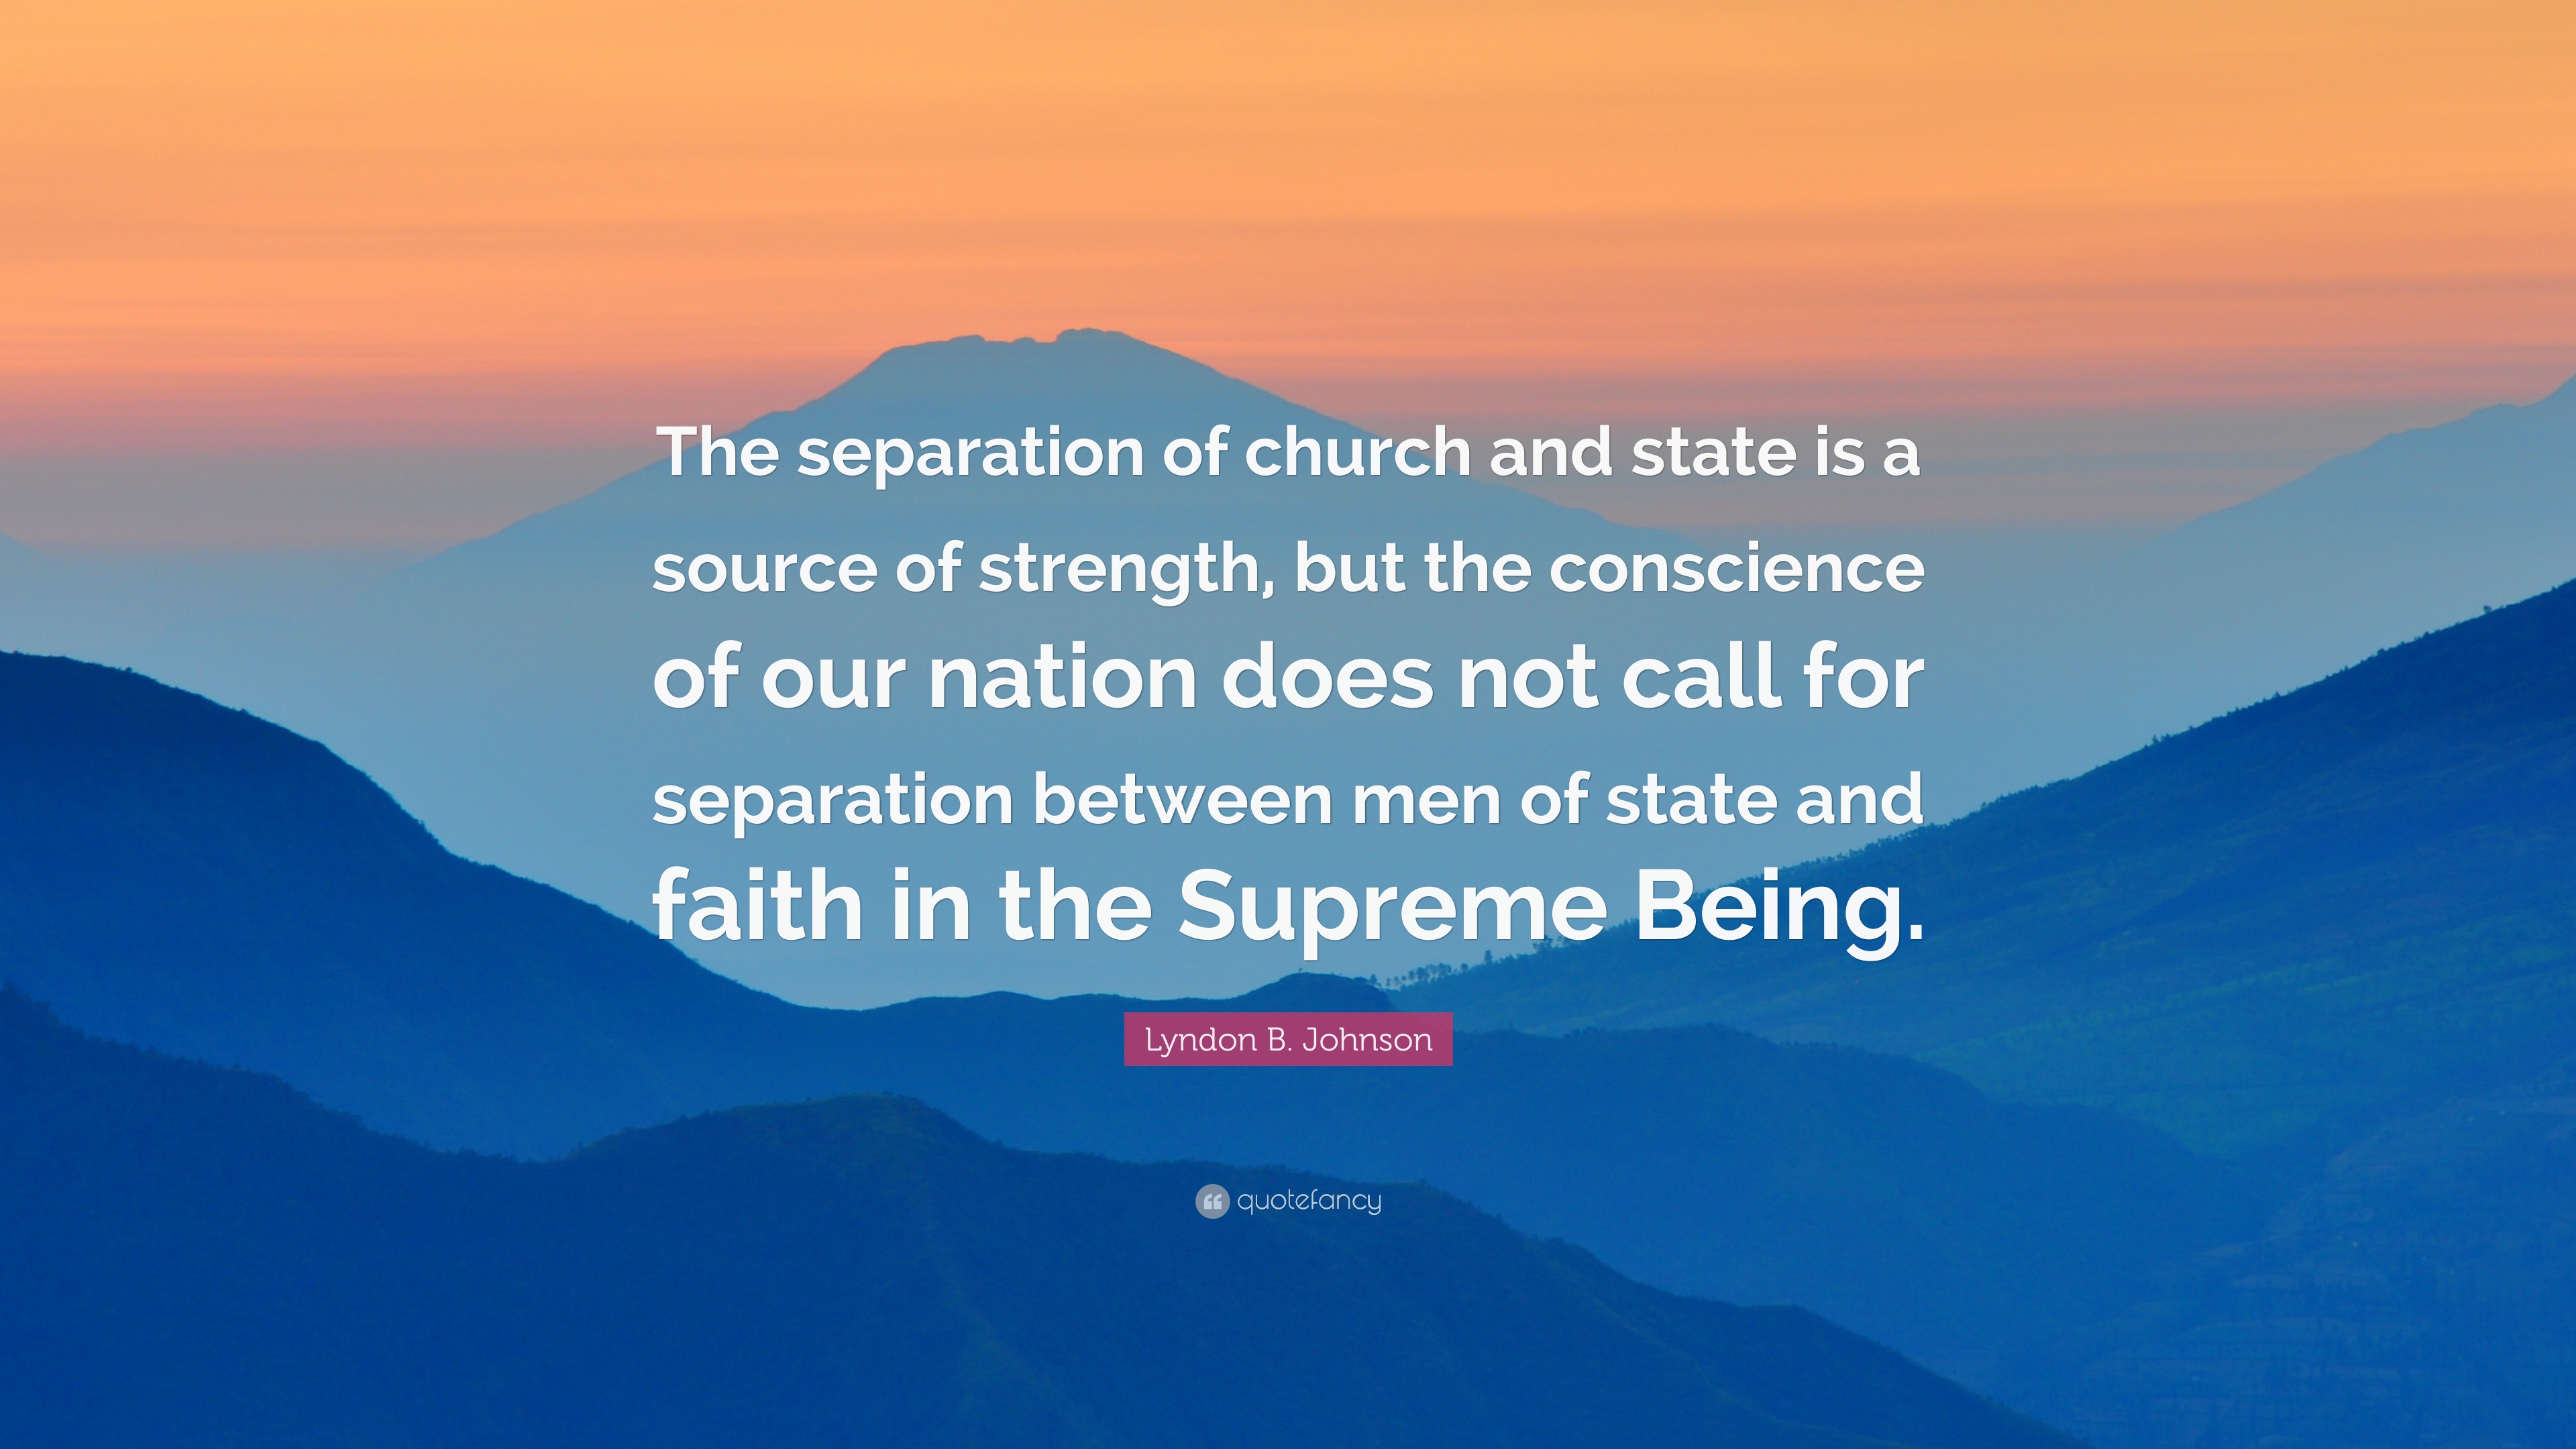 Lyndon B. Johnson Quote: “The separation of church and state is a